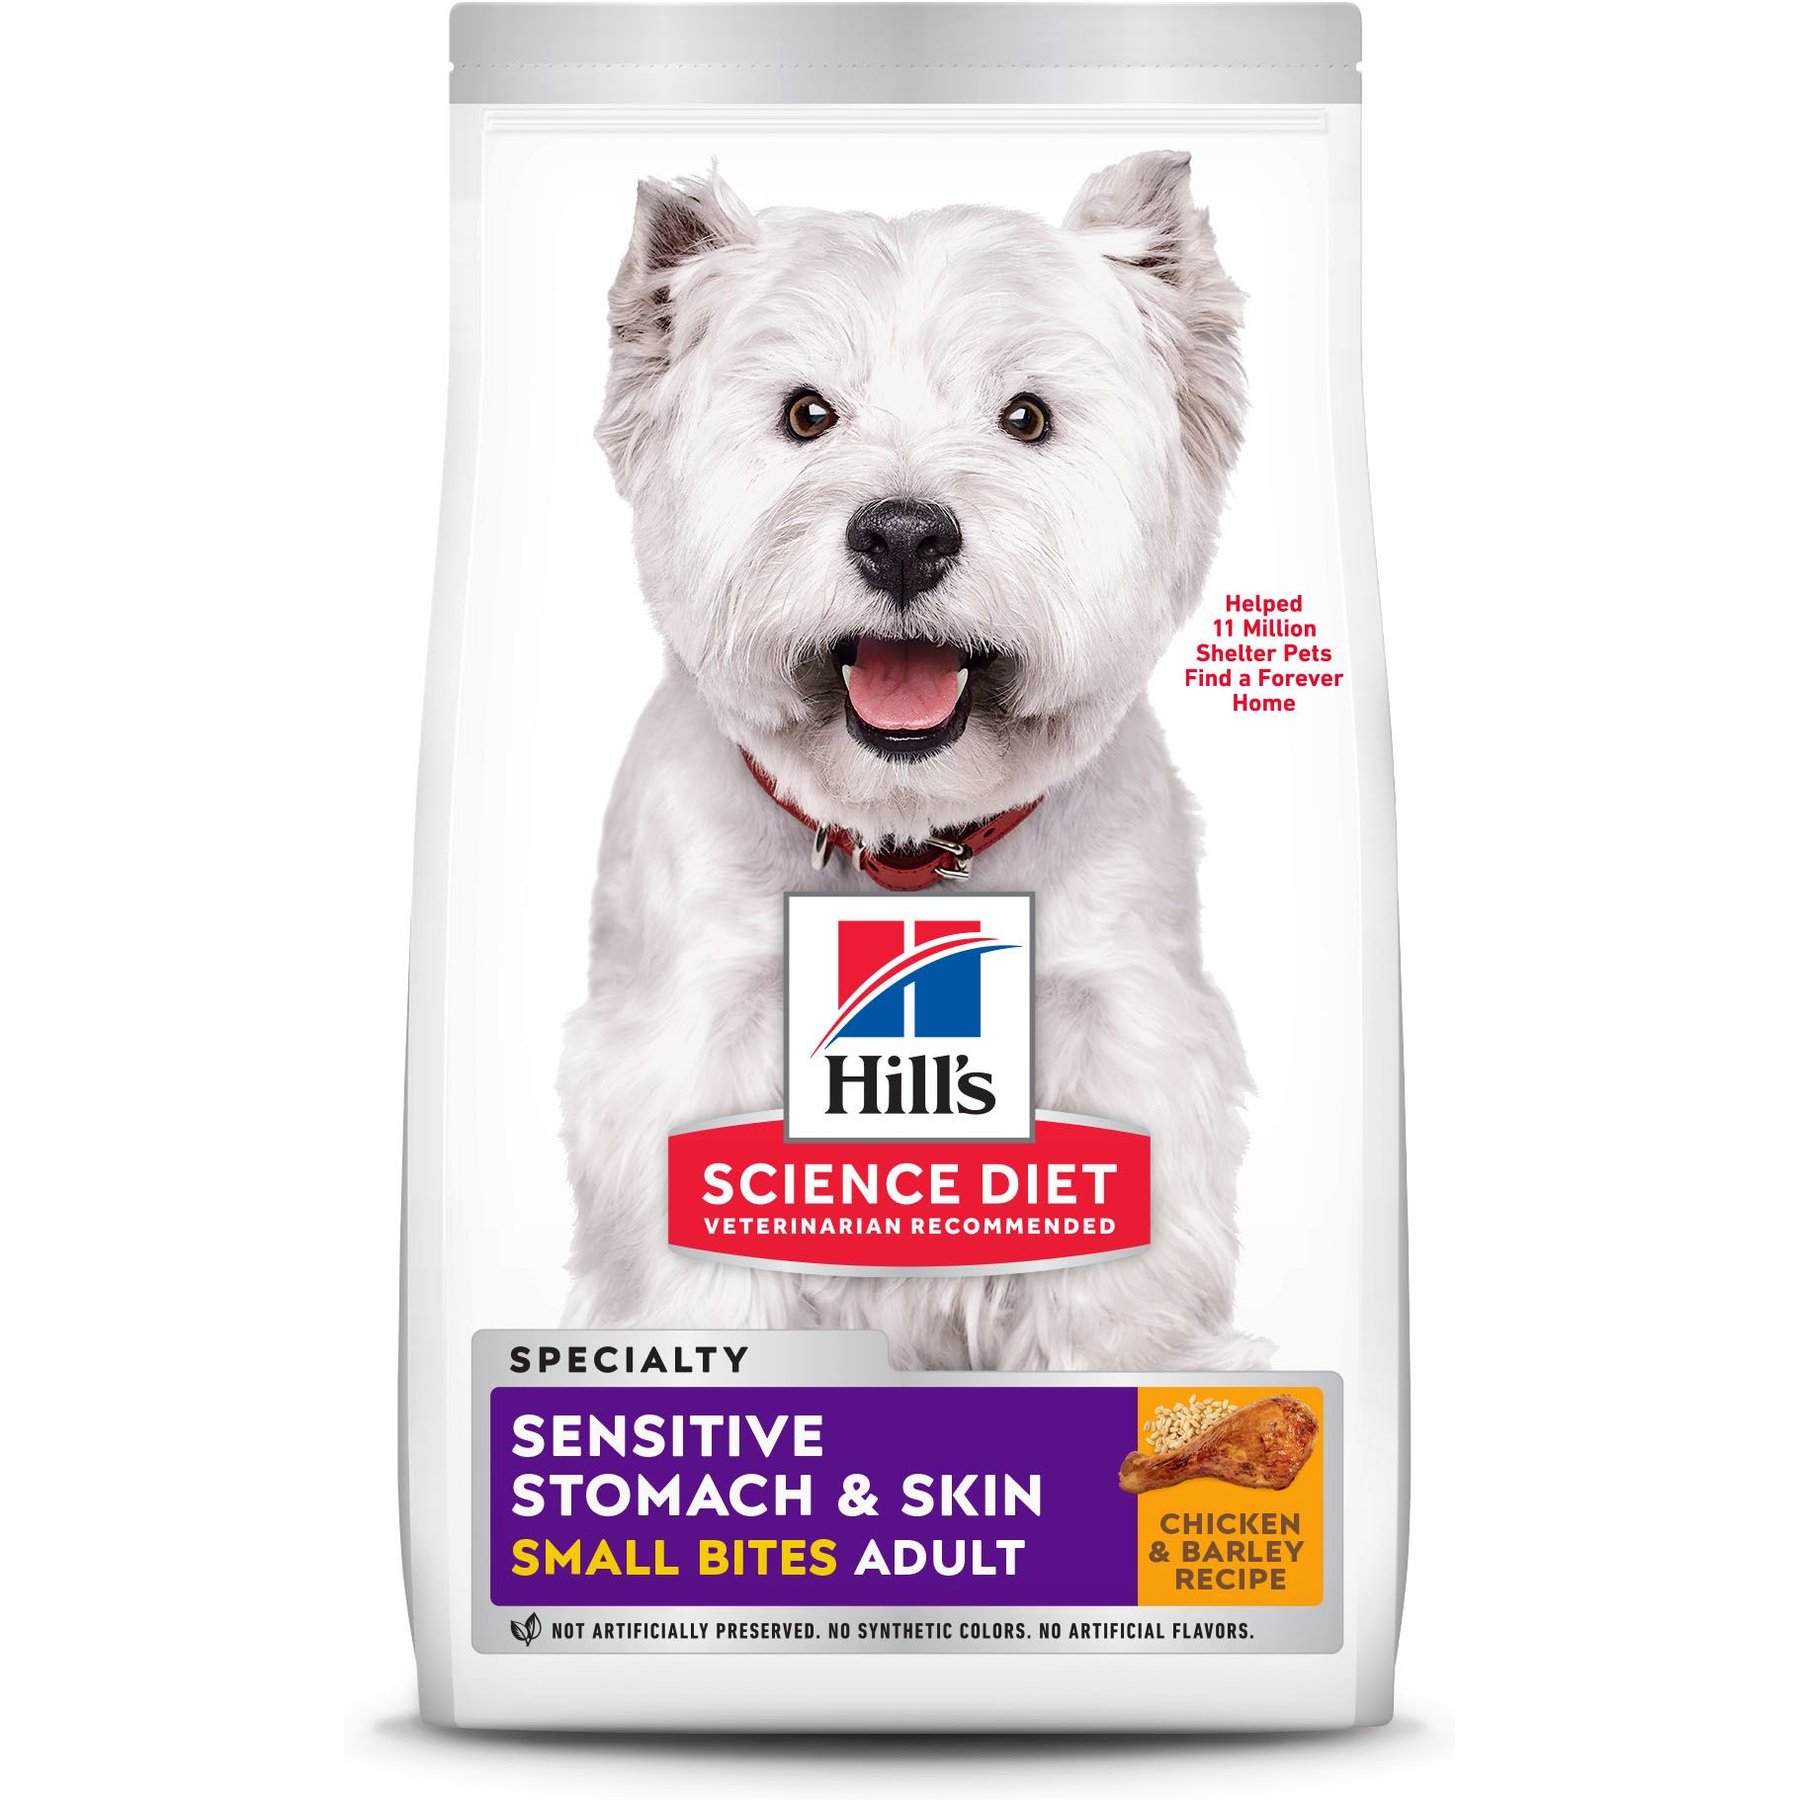 Hills Science Diet Dog Food, Premium, Chicken Meal & Rice Recipe, Small Paws, Adult 1-6 - 15.5 lb